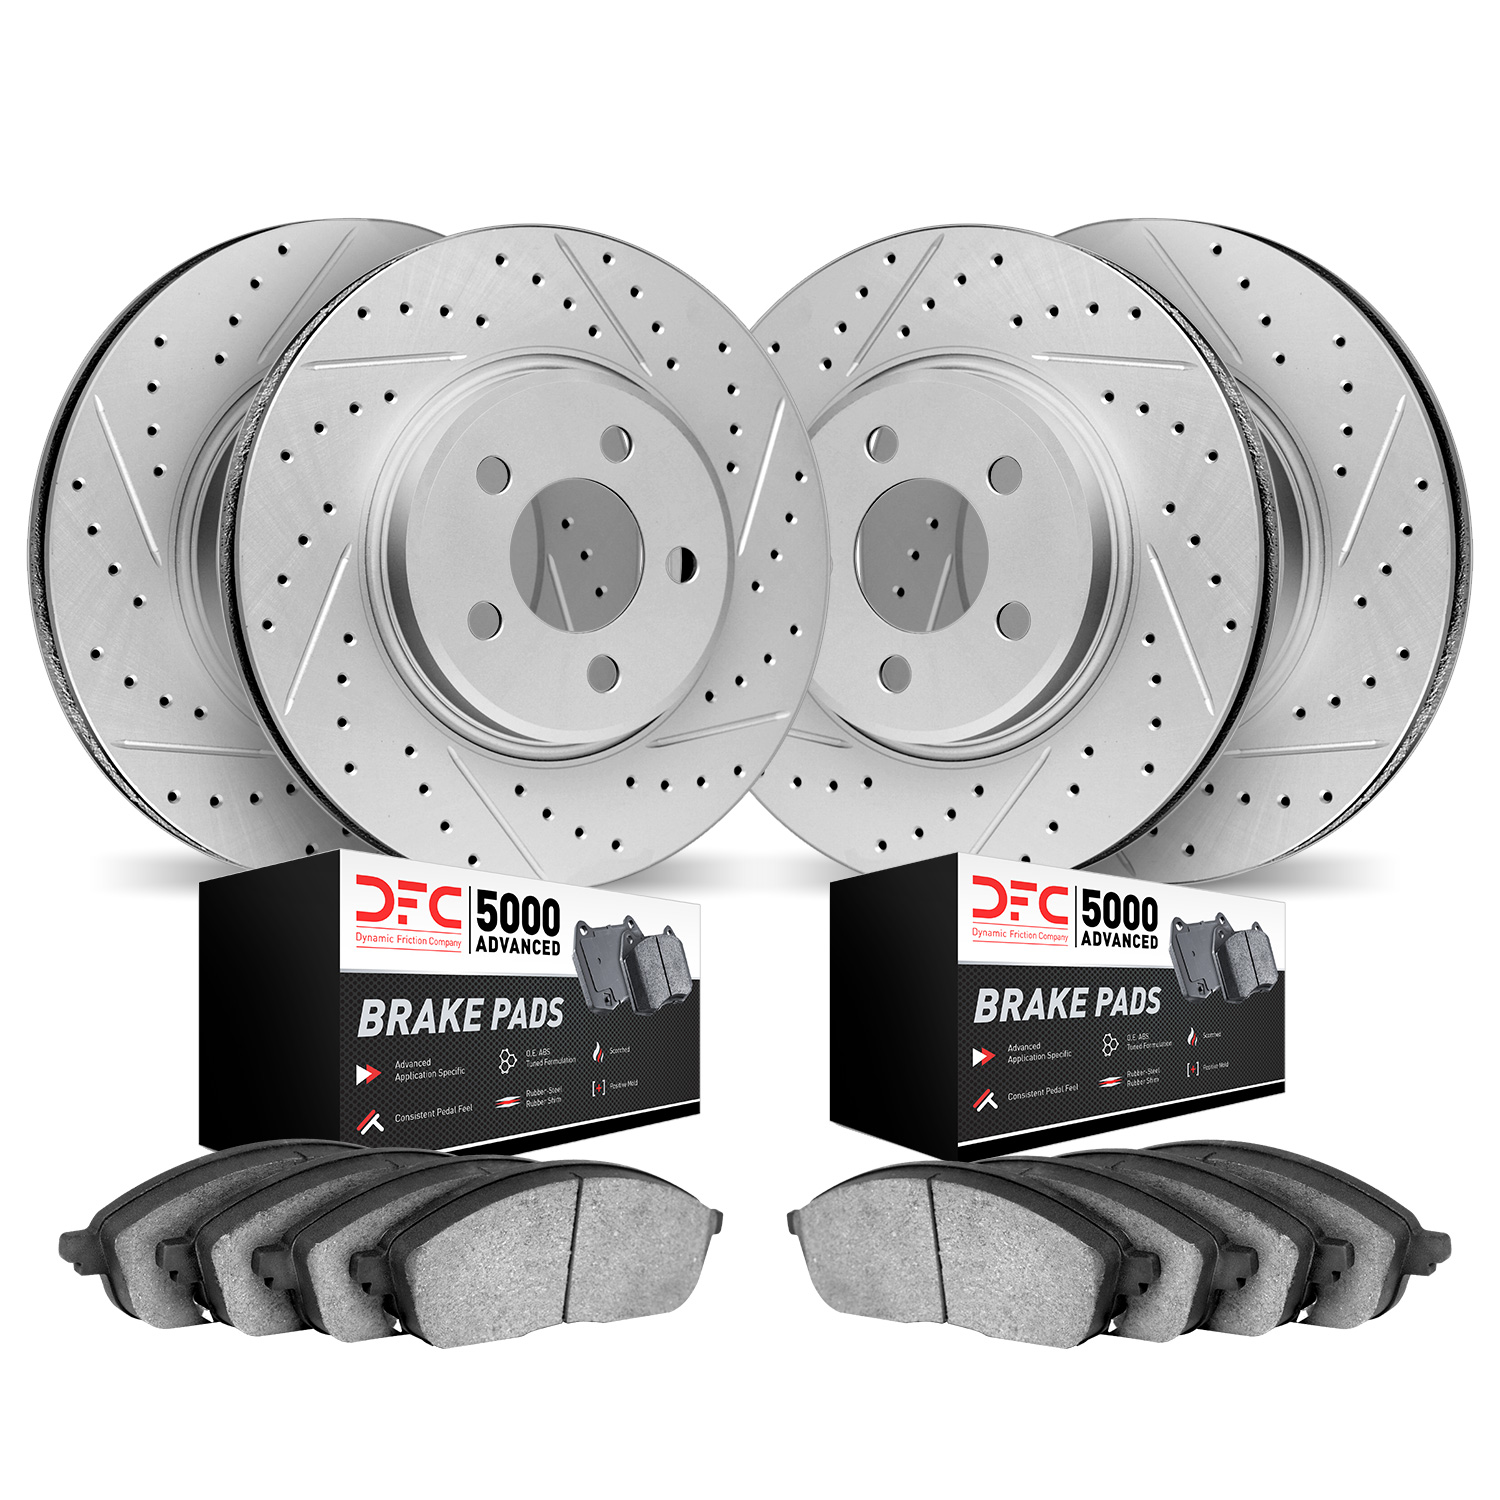 2504-46023 Geoperformance Drilled/Slotted Rotors w/5000 Advanced Brake Pads Kit, 2009-2015 GM, Position: Front and Rear